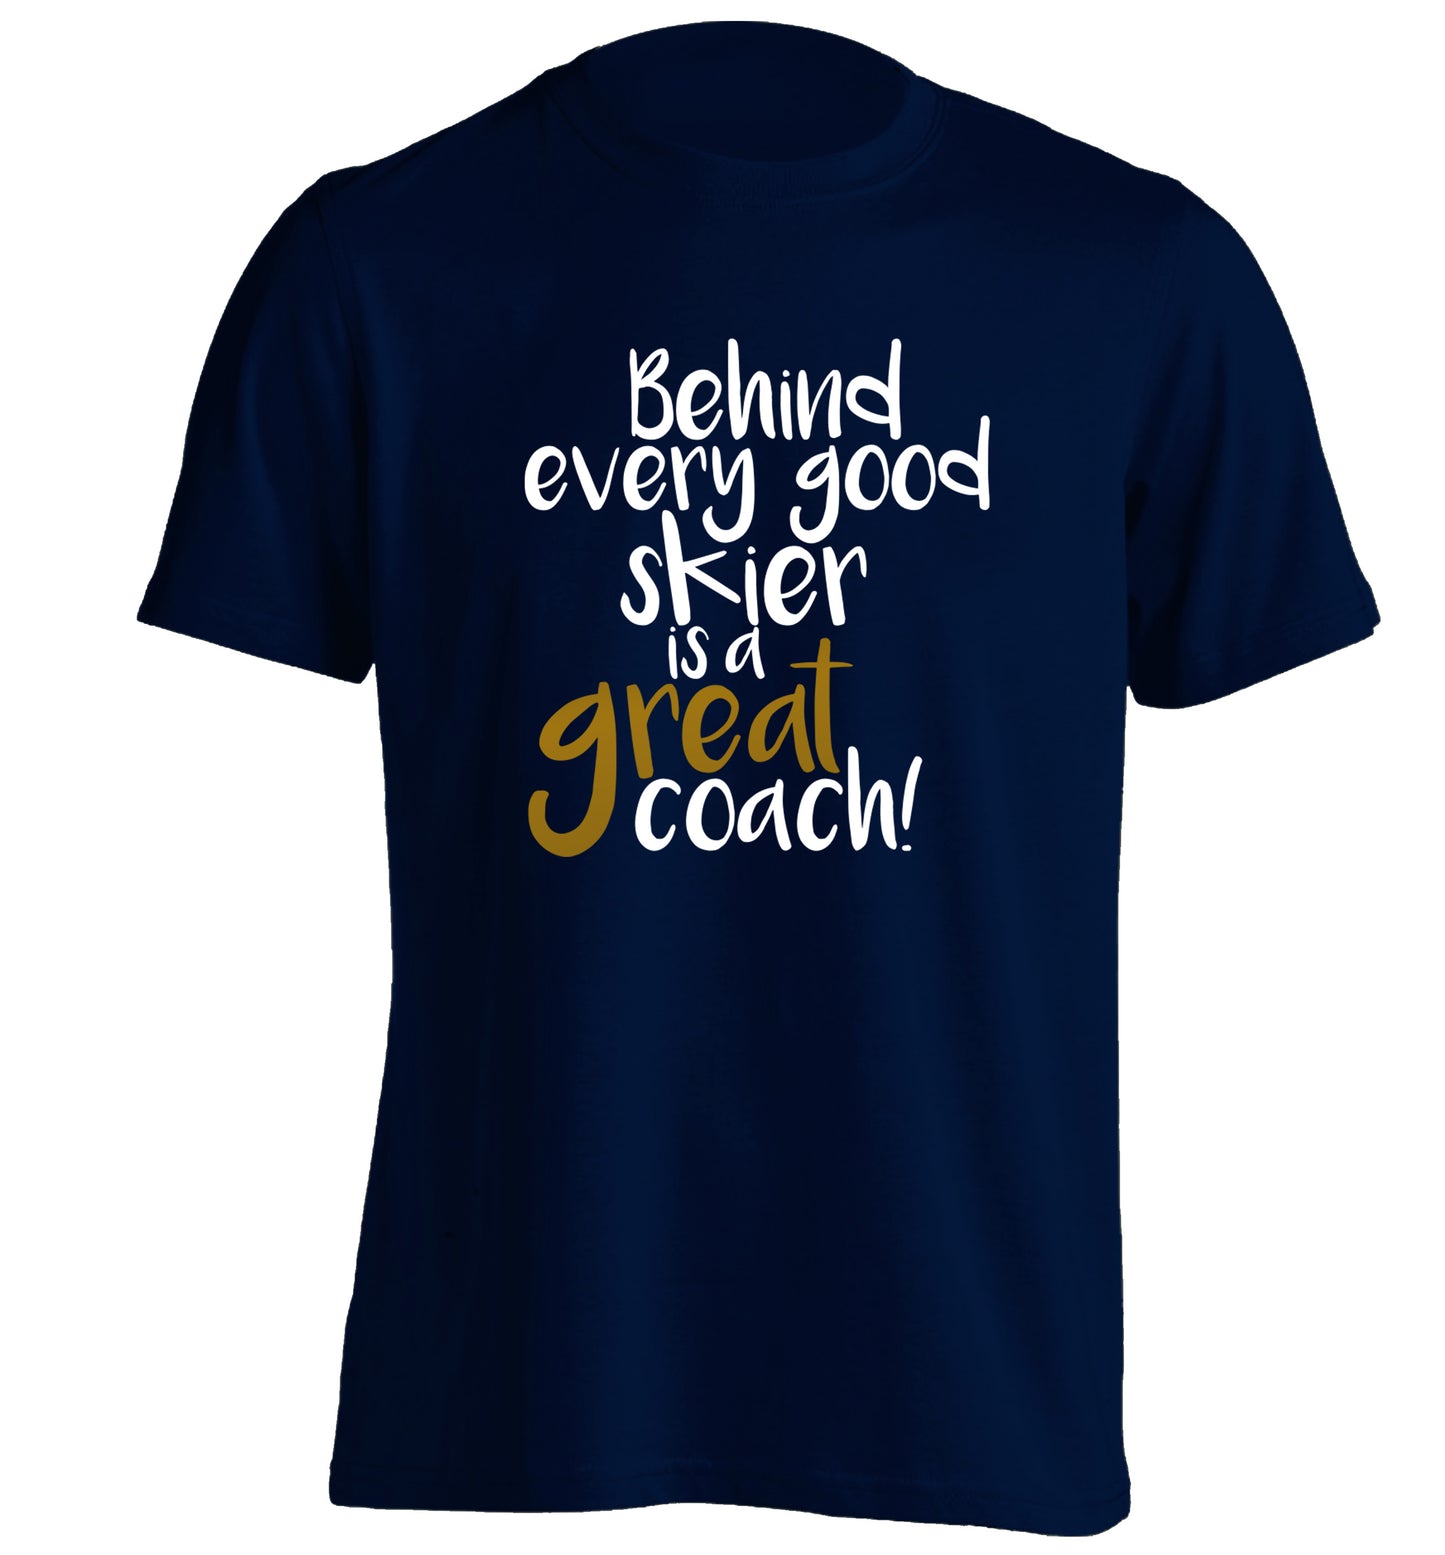 Behind every good skier is a great coach! adults unisexnavy Tshirt 2XL